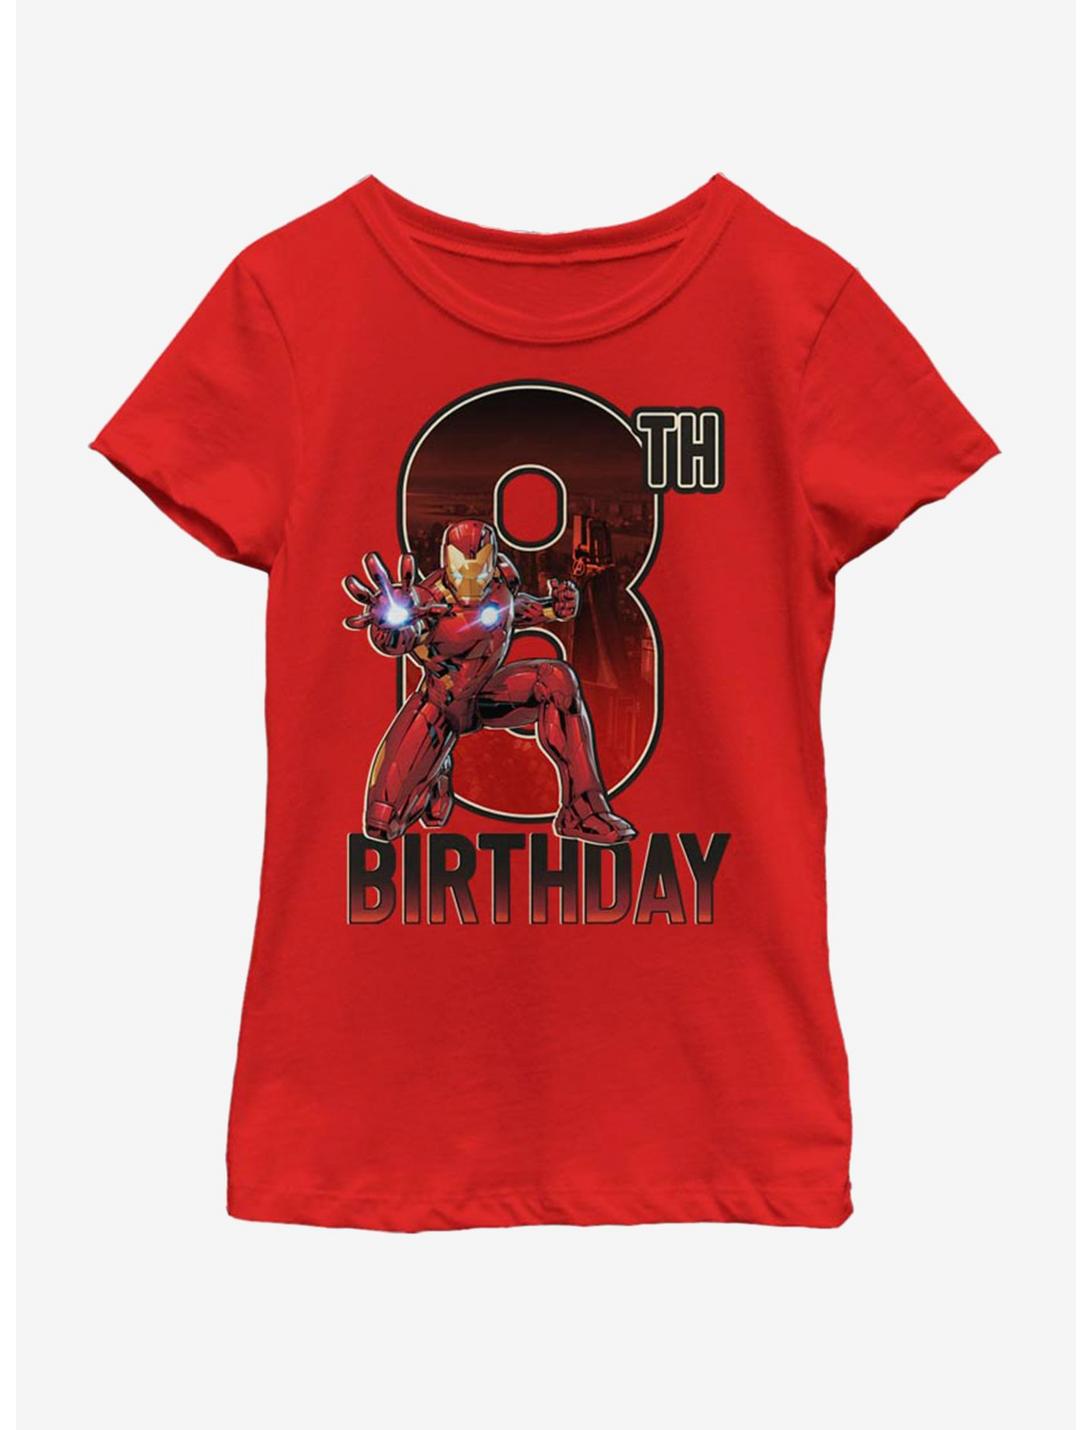 Marvel Ironman 8th Bday Youth Girls T-Shirt, RED, hi-res